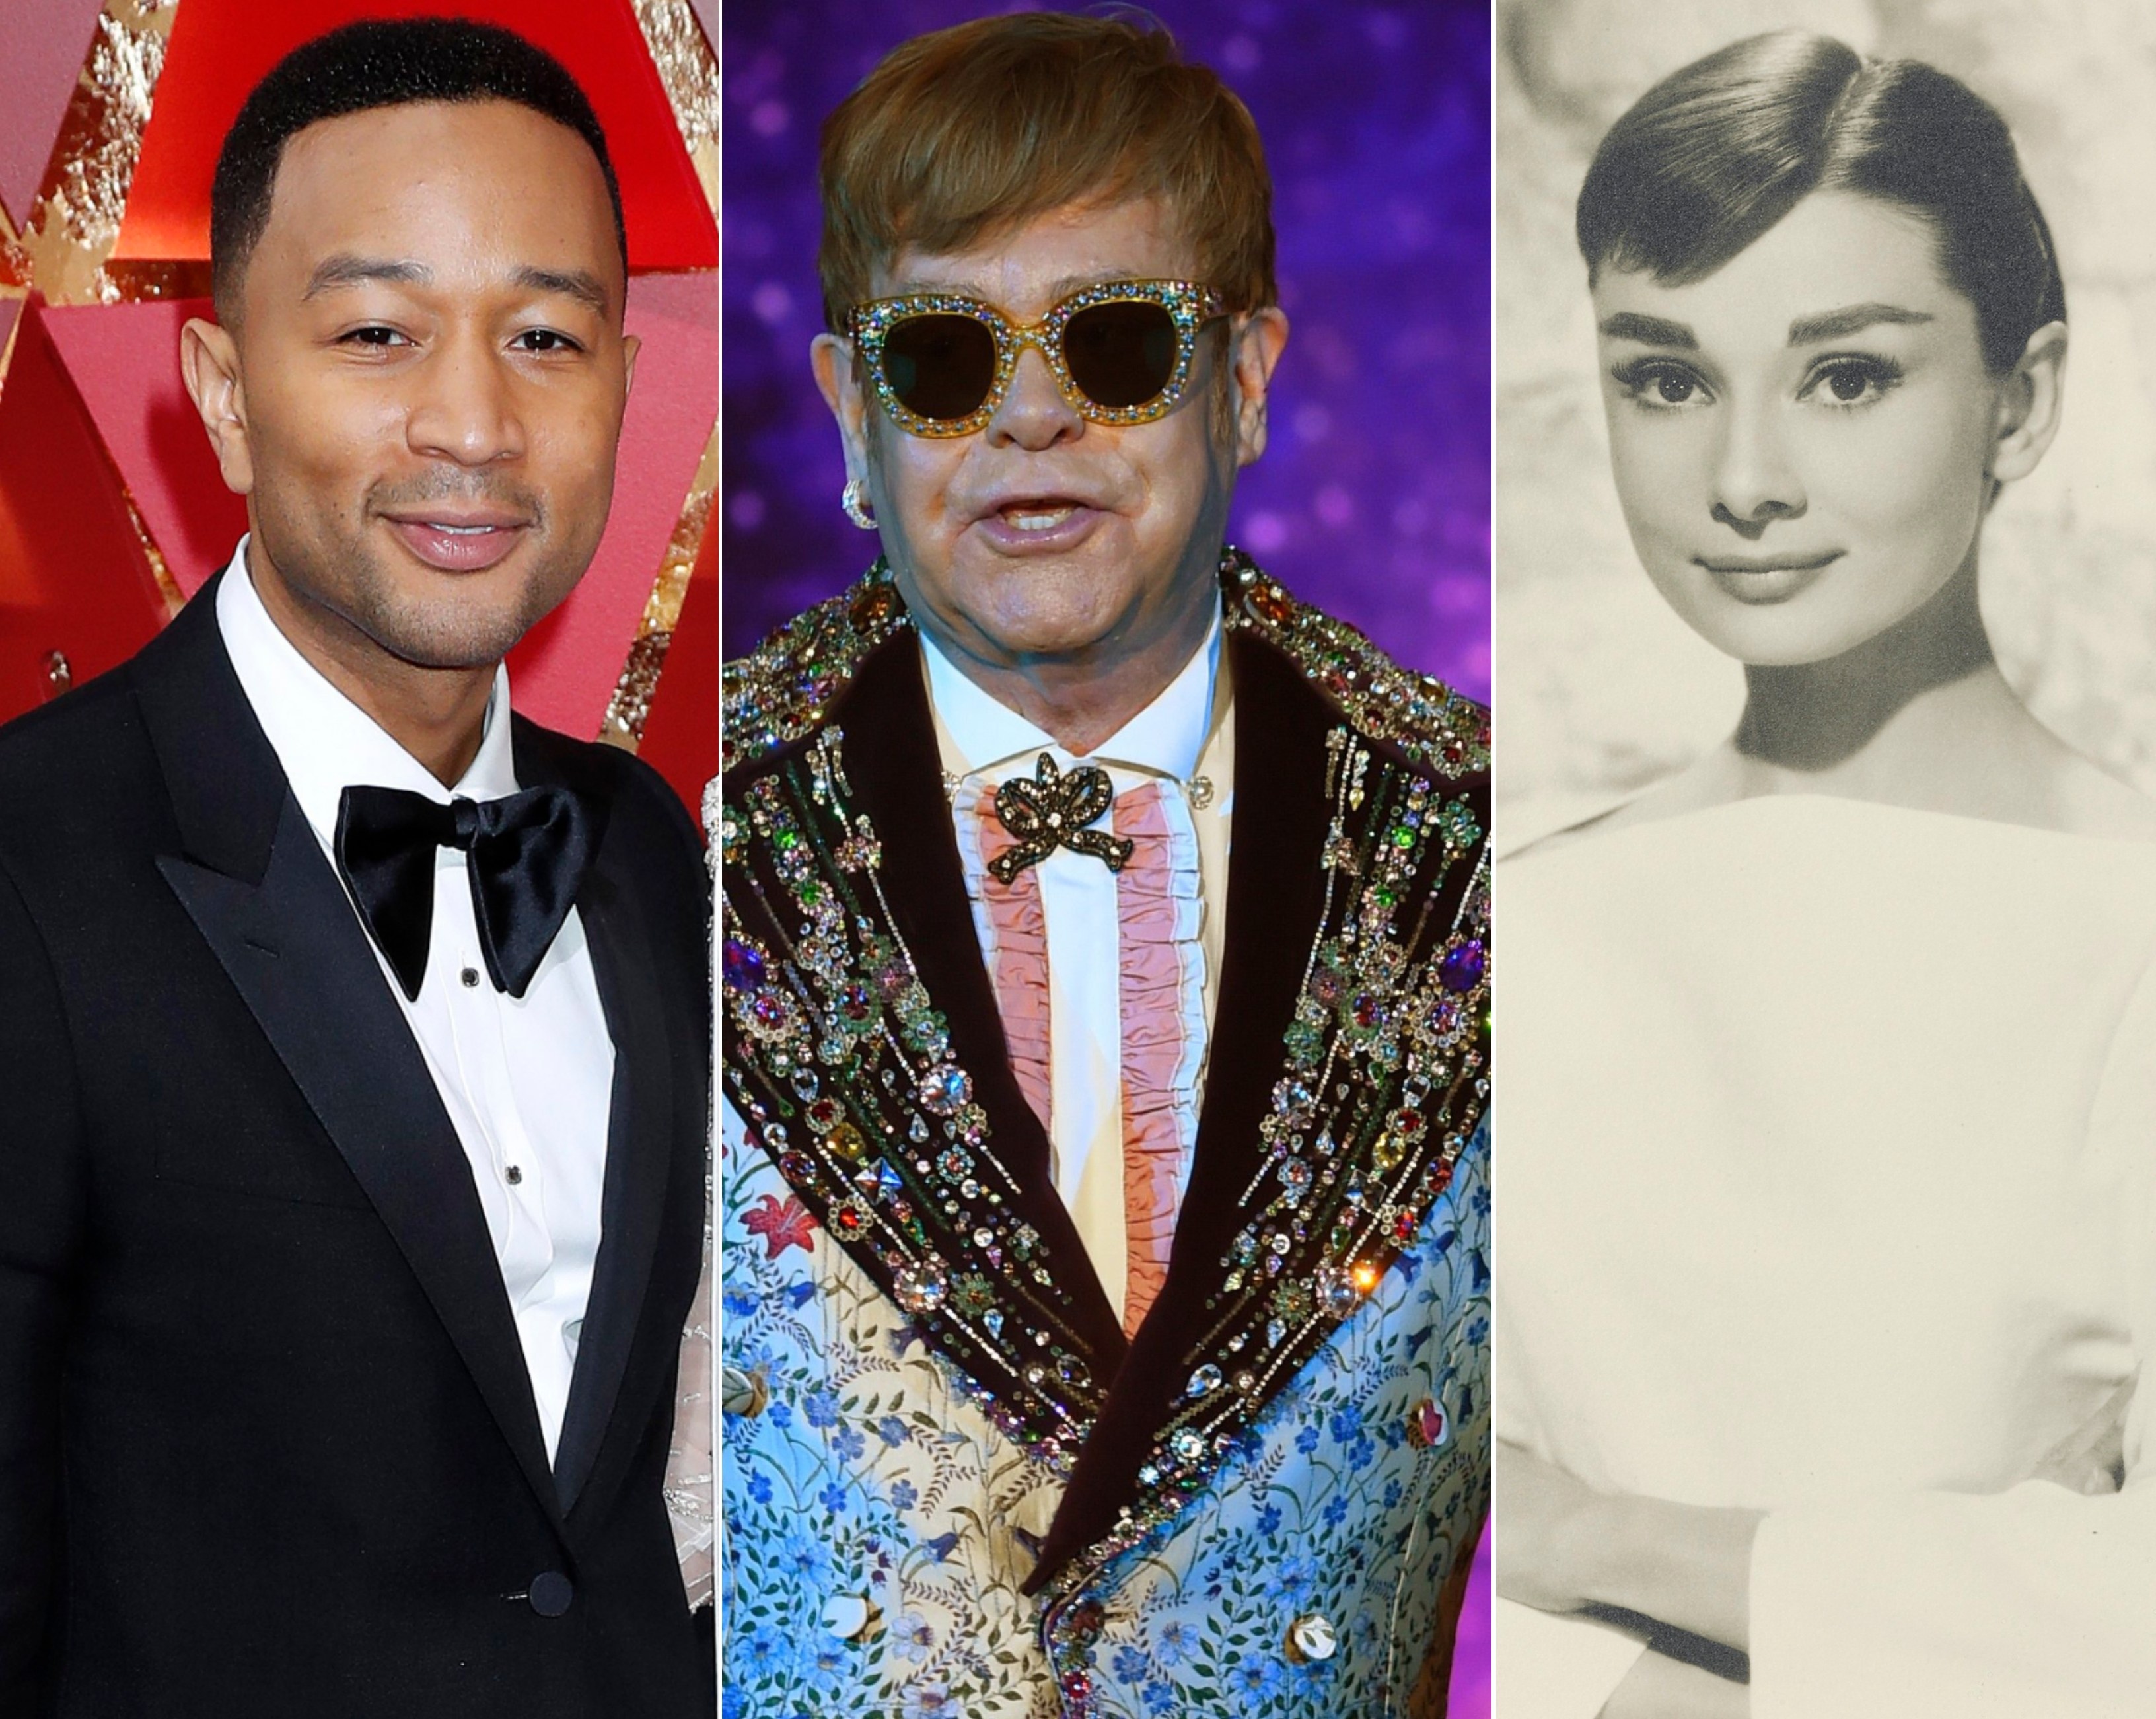 John Legend, Elton John and Audrey Hepburn have all received the coveted “EGOT” combination of awards over the years. Photos: EPA, AFP, Christie’s Images